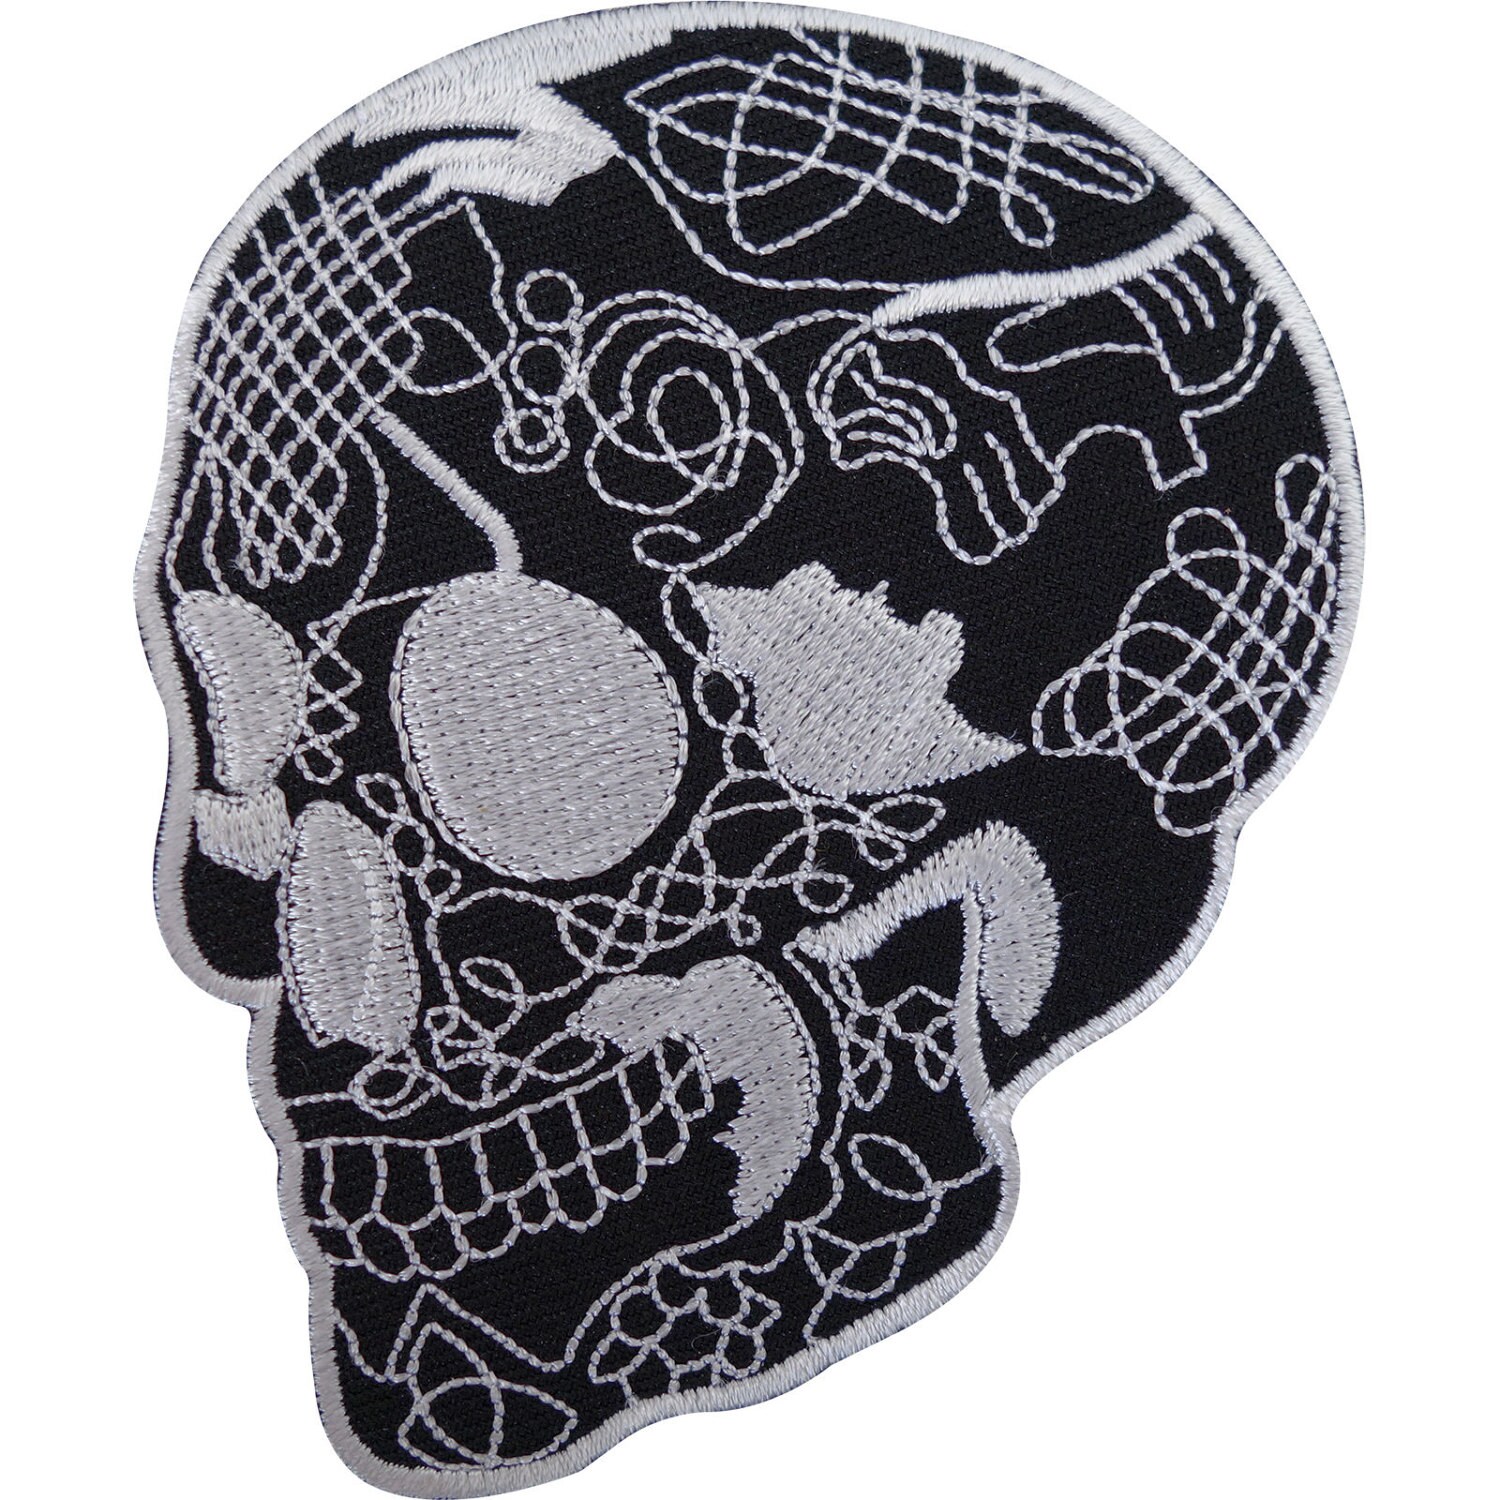 SKULL CROSSBONE BIKER BABY MOTORCYCLE Embroidered Iron on Patch Free Shipping 